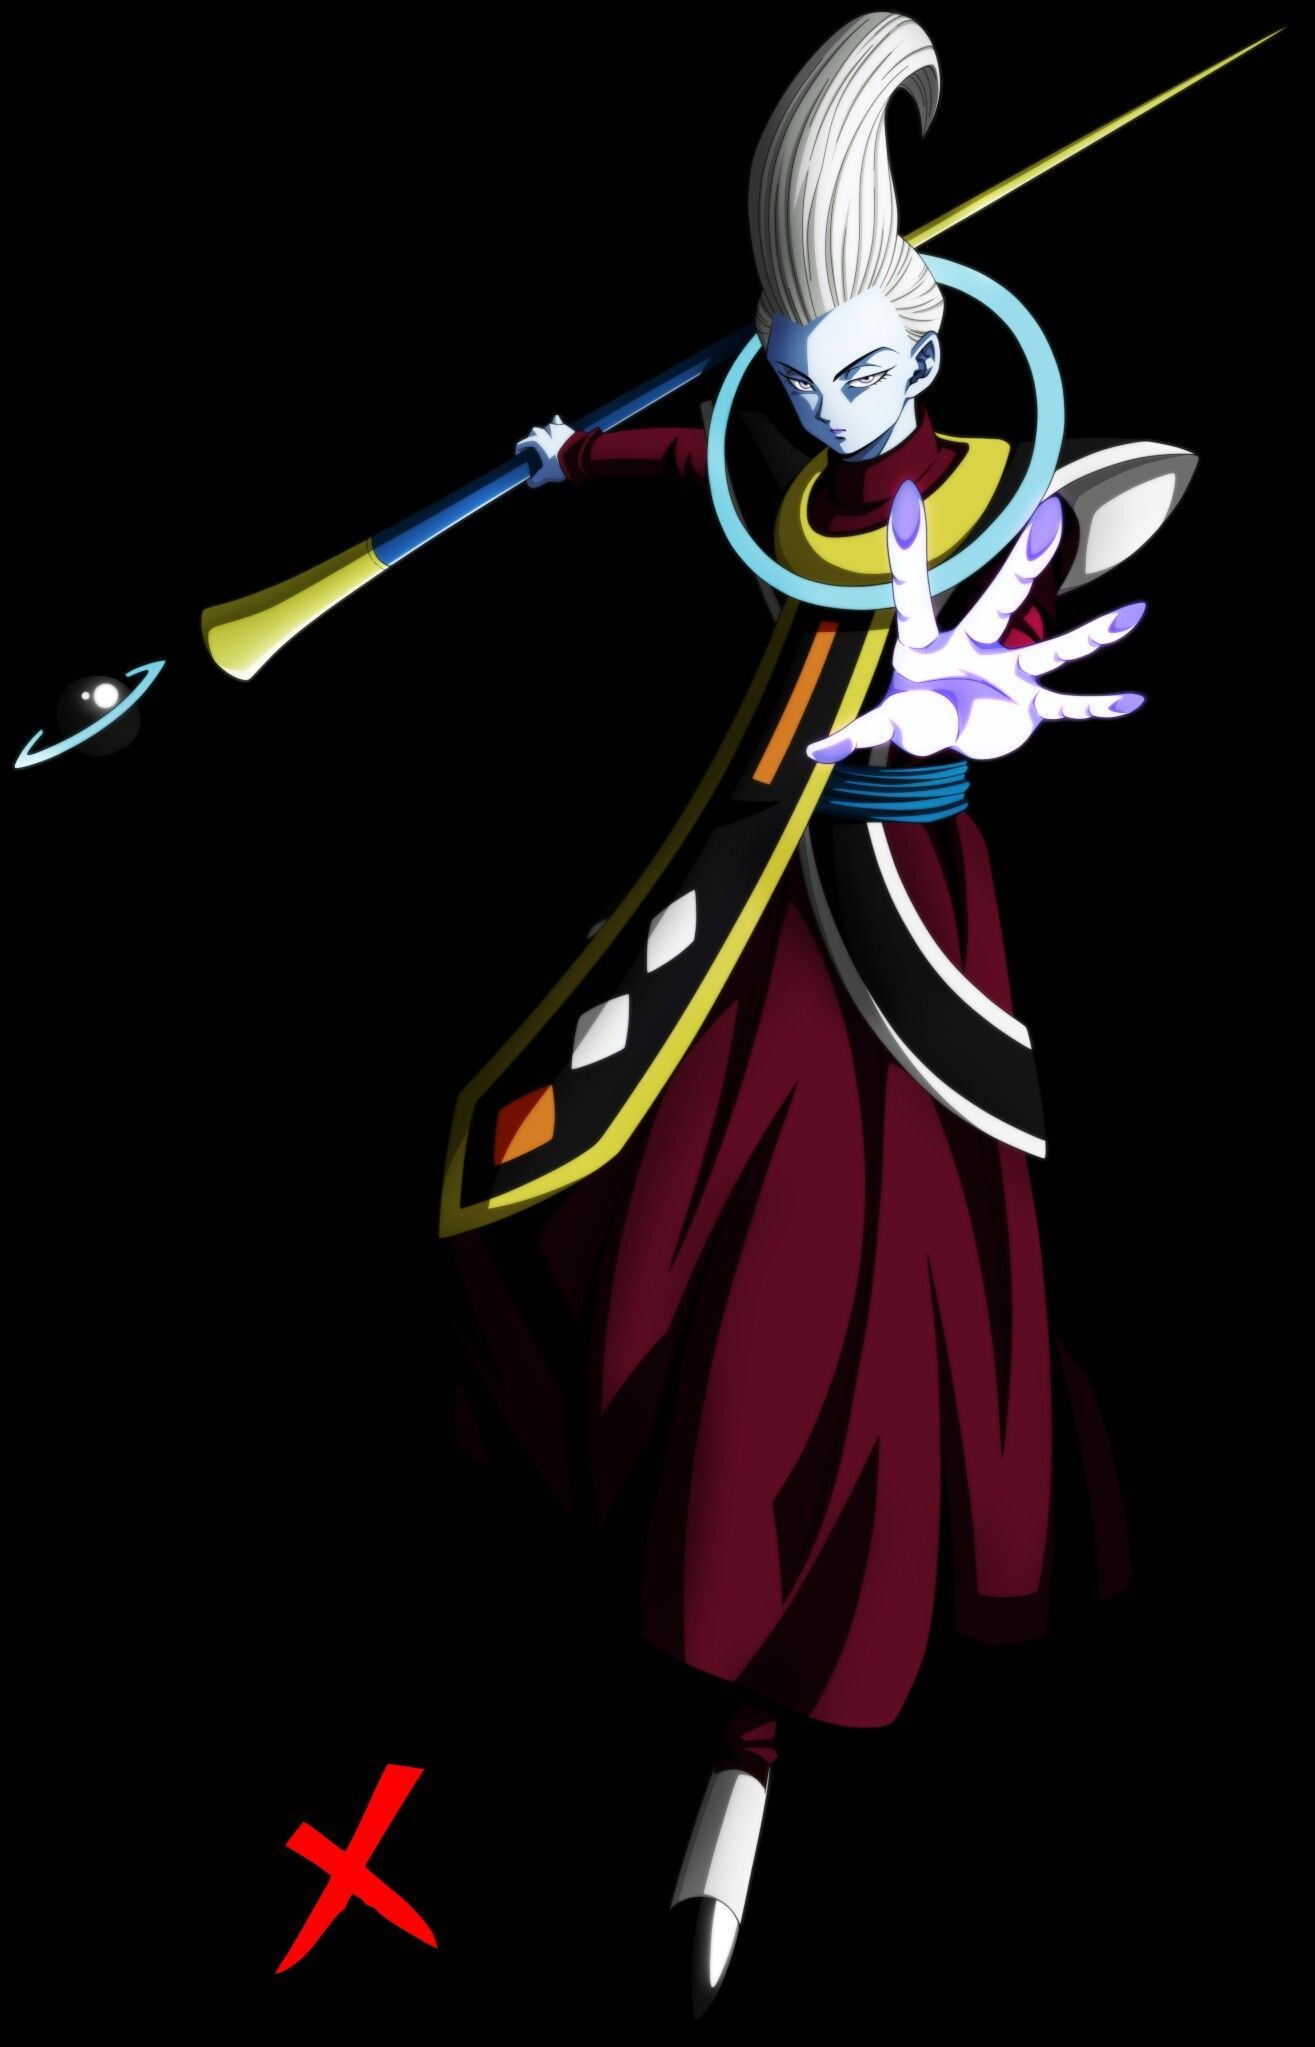 Dragon Ball Super Whis Android Wallpapers - Wallpaper Cave